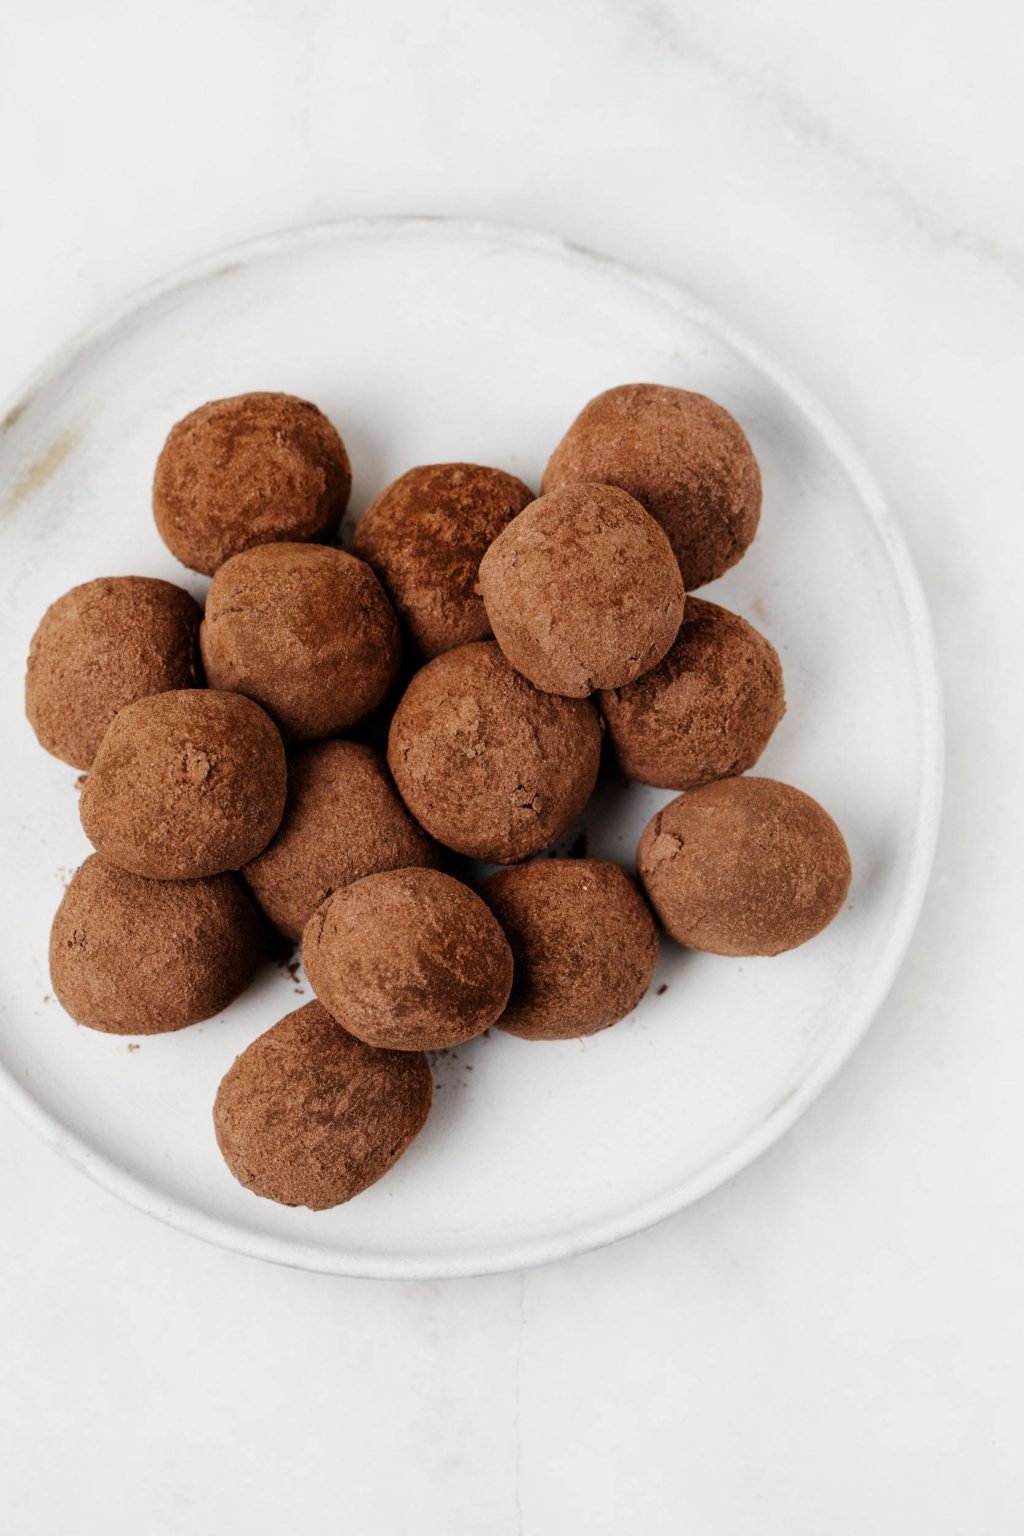 Round, cocoa-dusted espresso truffles are resting on a small, white plate.